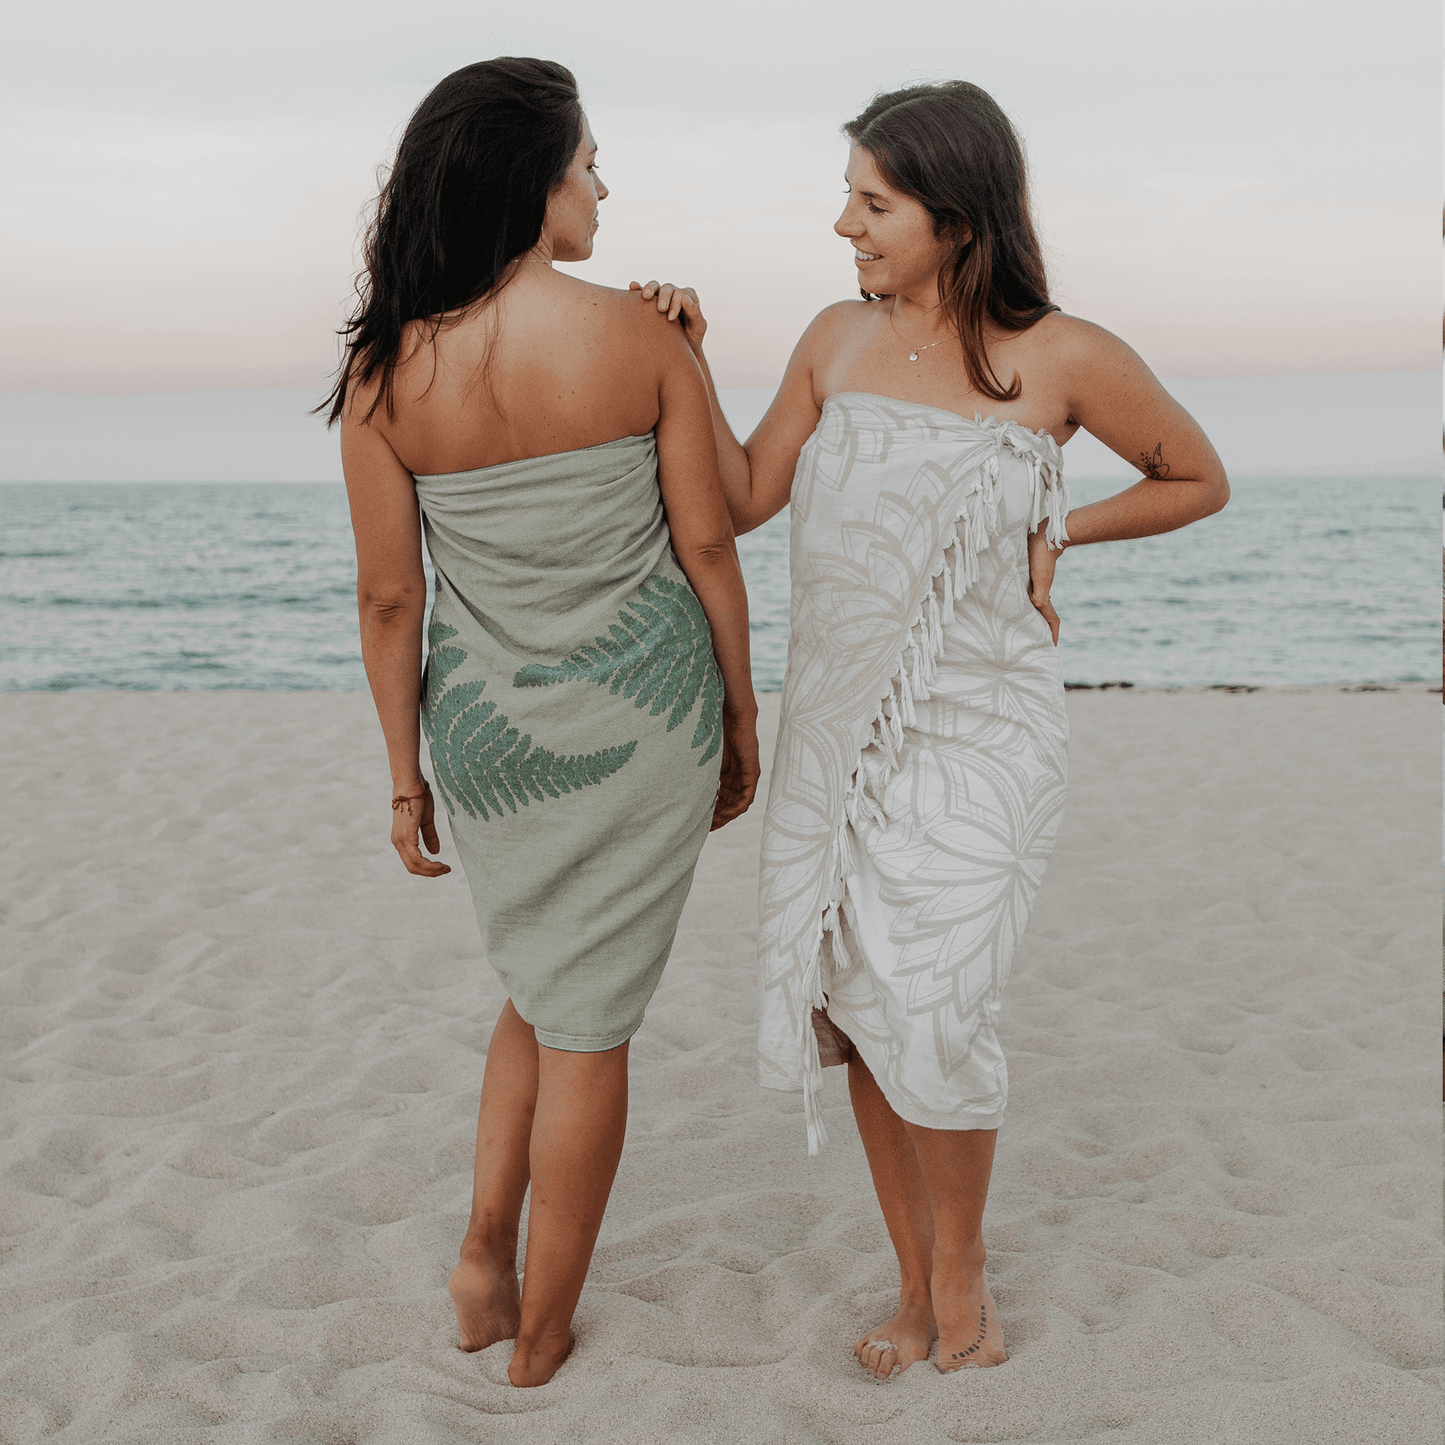 Two women at the beach using Turkish towels as sarongs